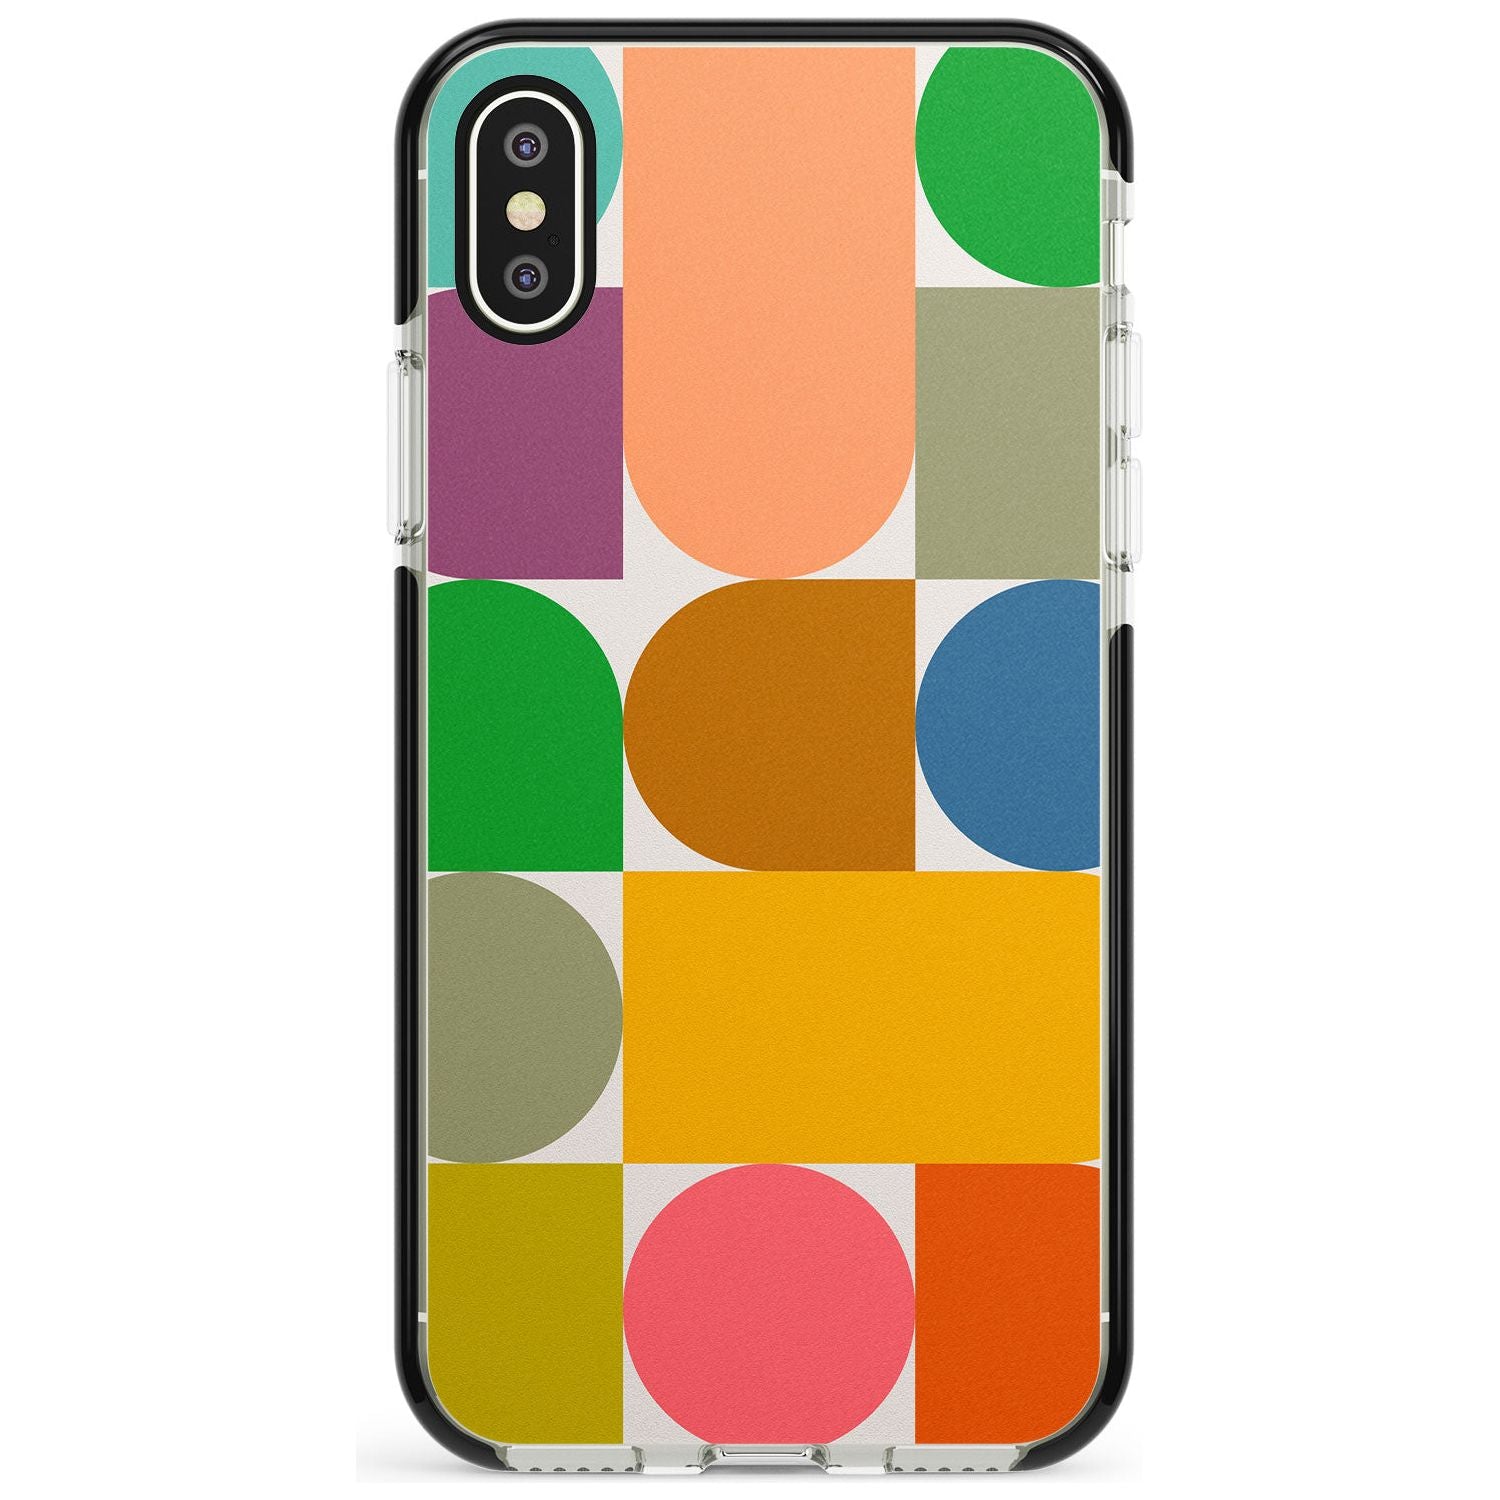 Abstract Retro Shapes: Rainbow Mix Pink Fade Impact Phone Case for iPhone X XS Max XR